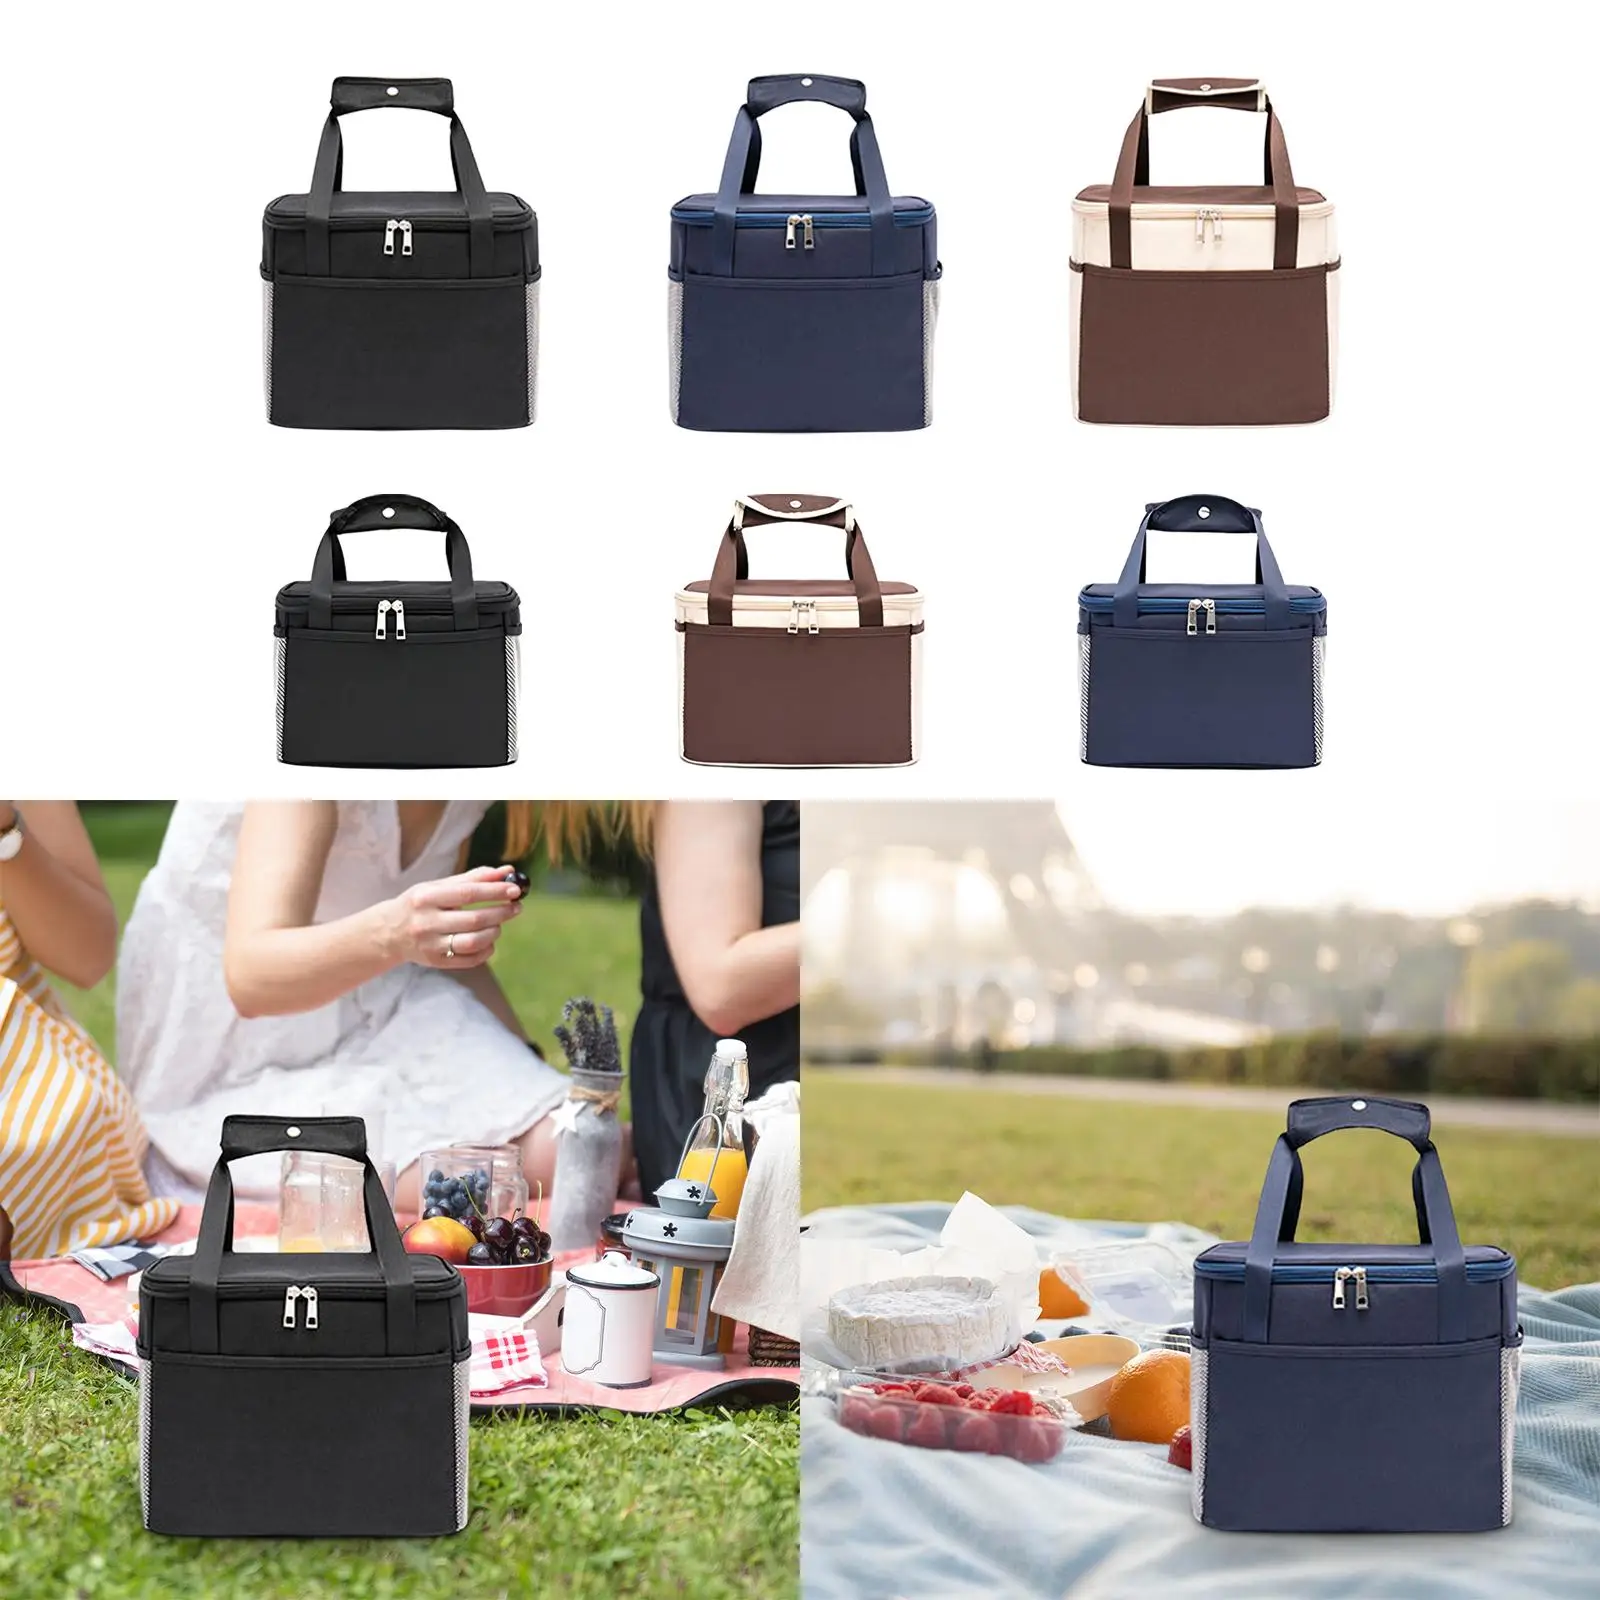 Insulated Cooler Bag Soft with Zipper Closure Waterproof Thermal Tableware Handbag Tote Bag for Party Beach Hiking Trip Camping